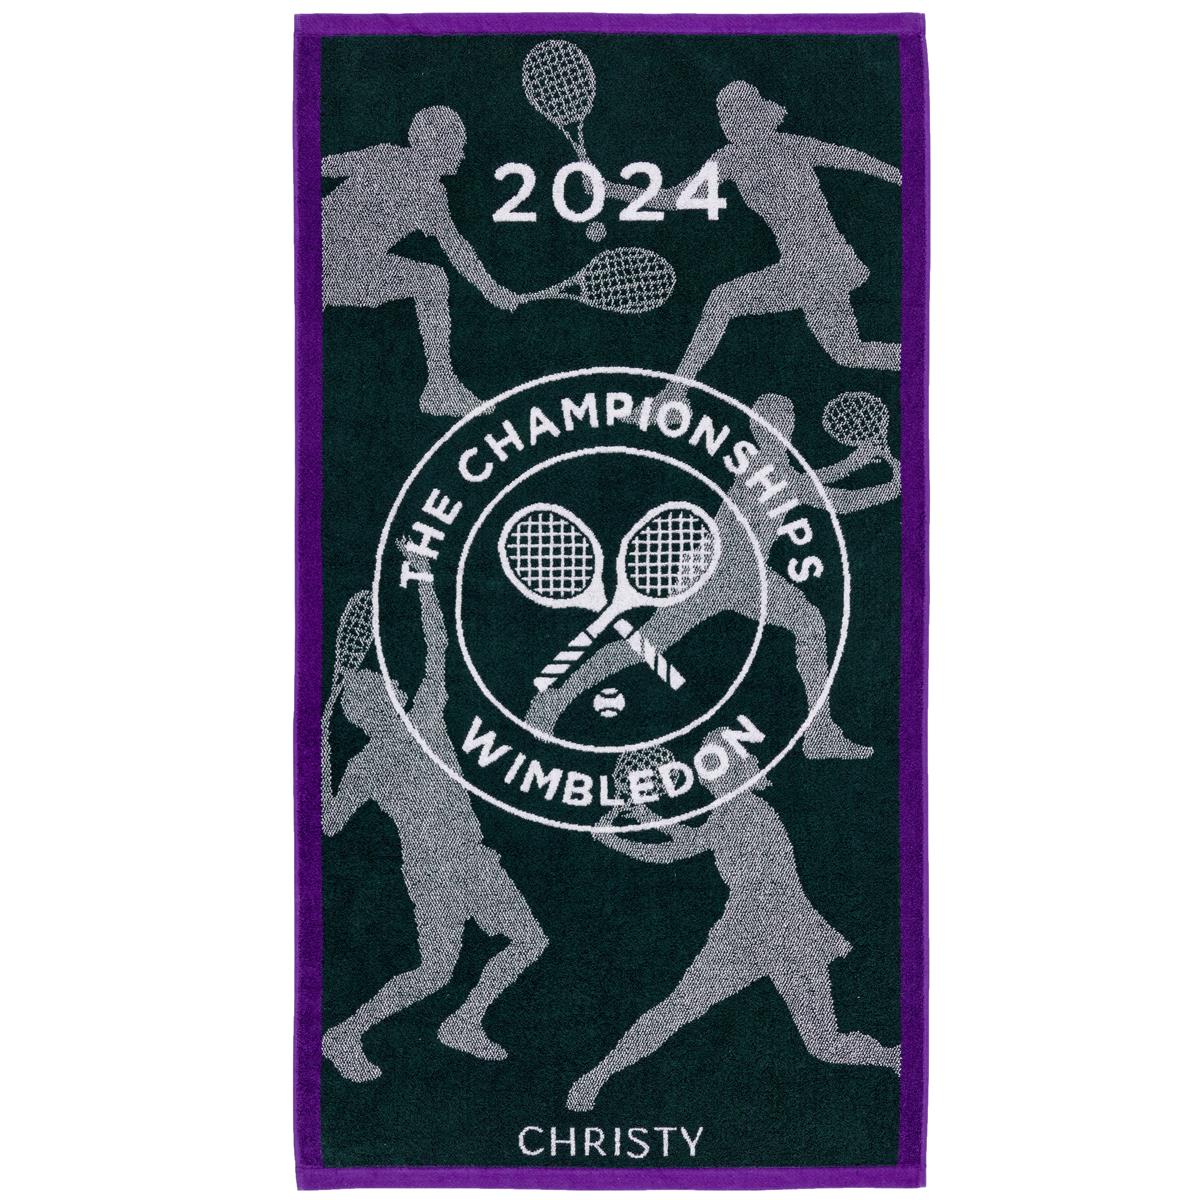 Why do Wimbledon towels say Christy?